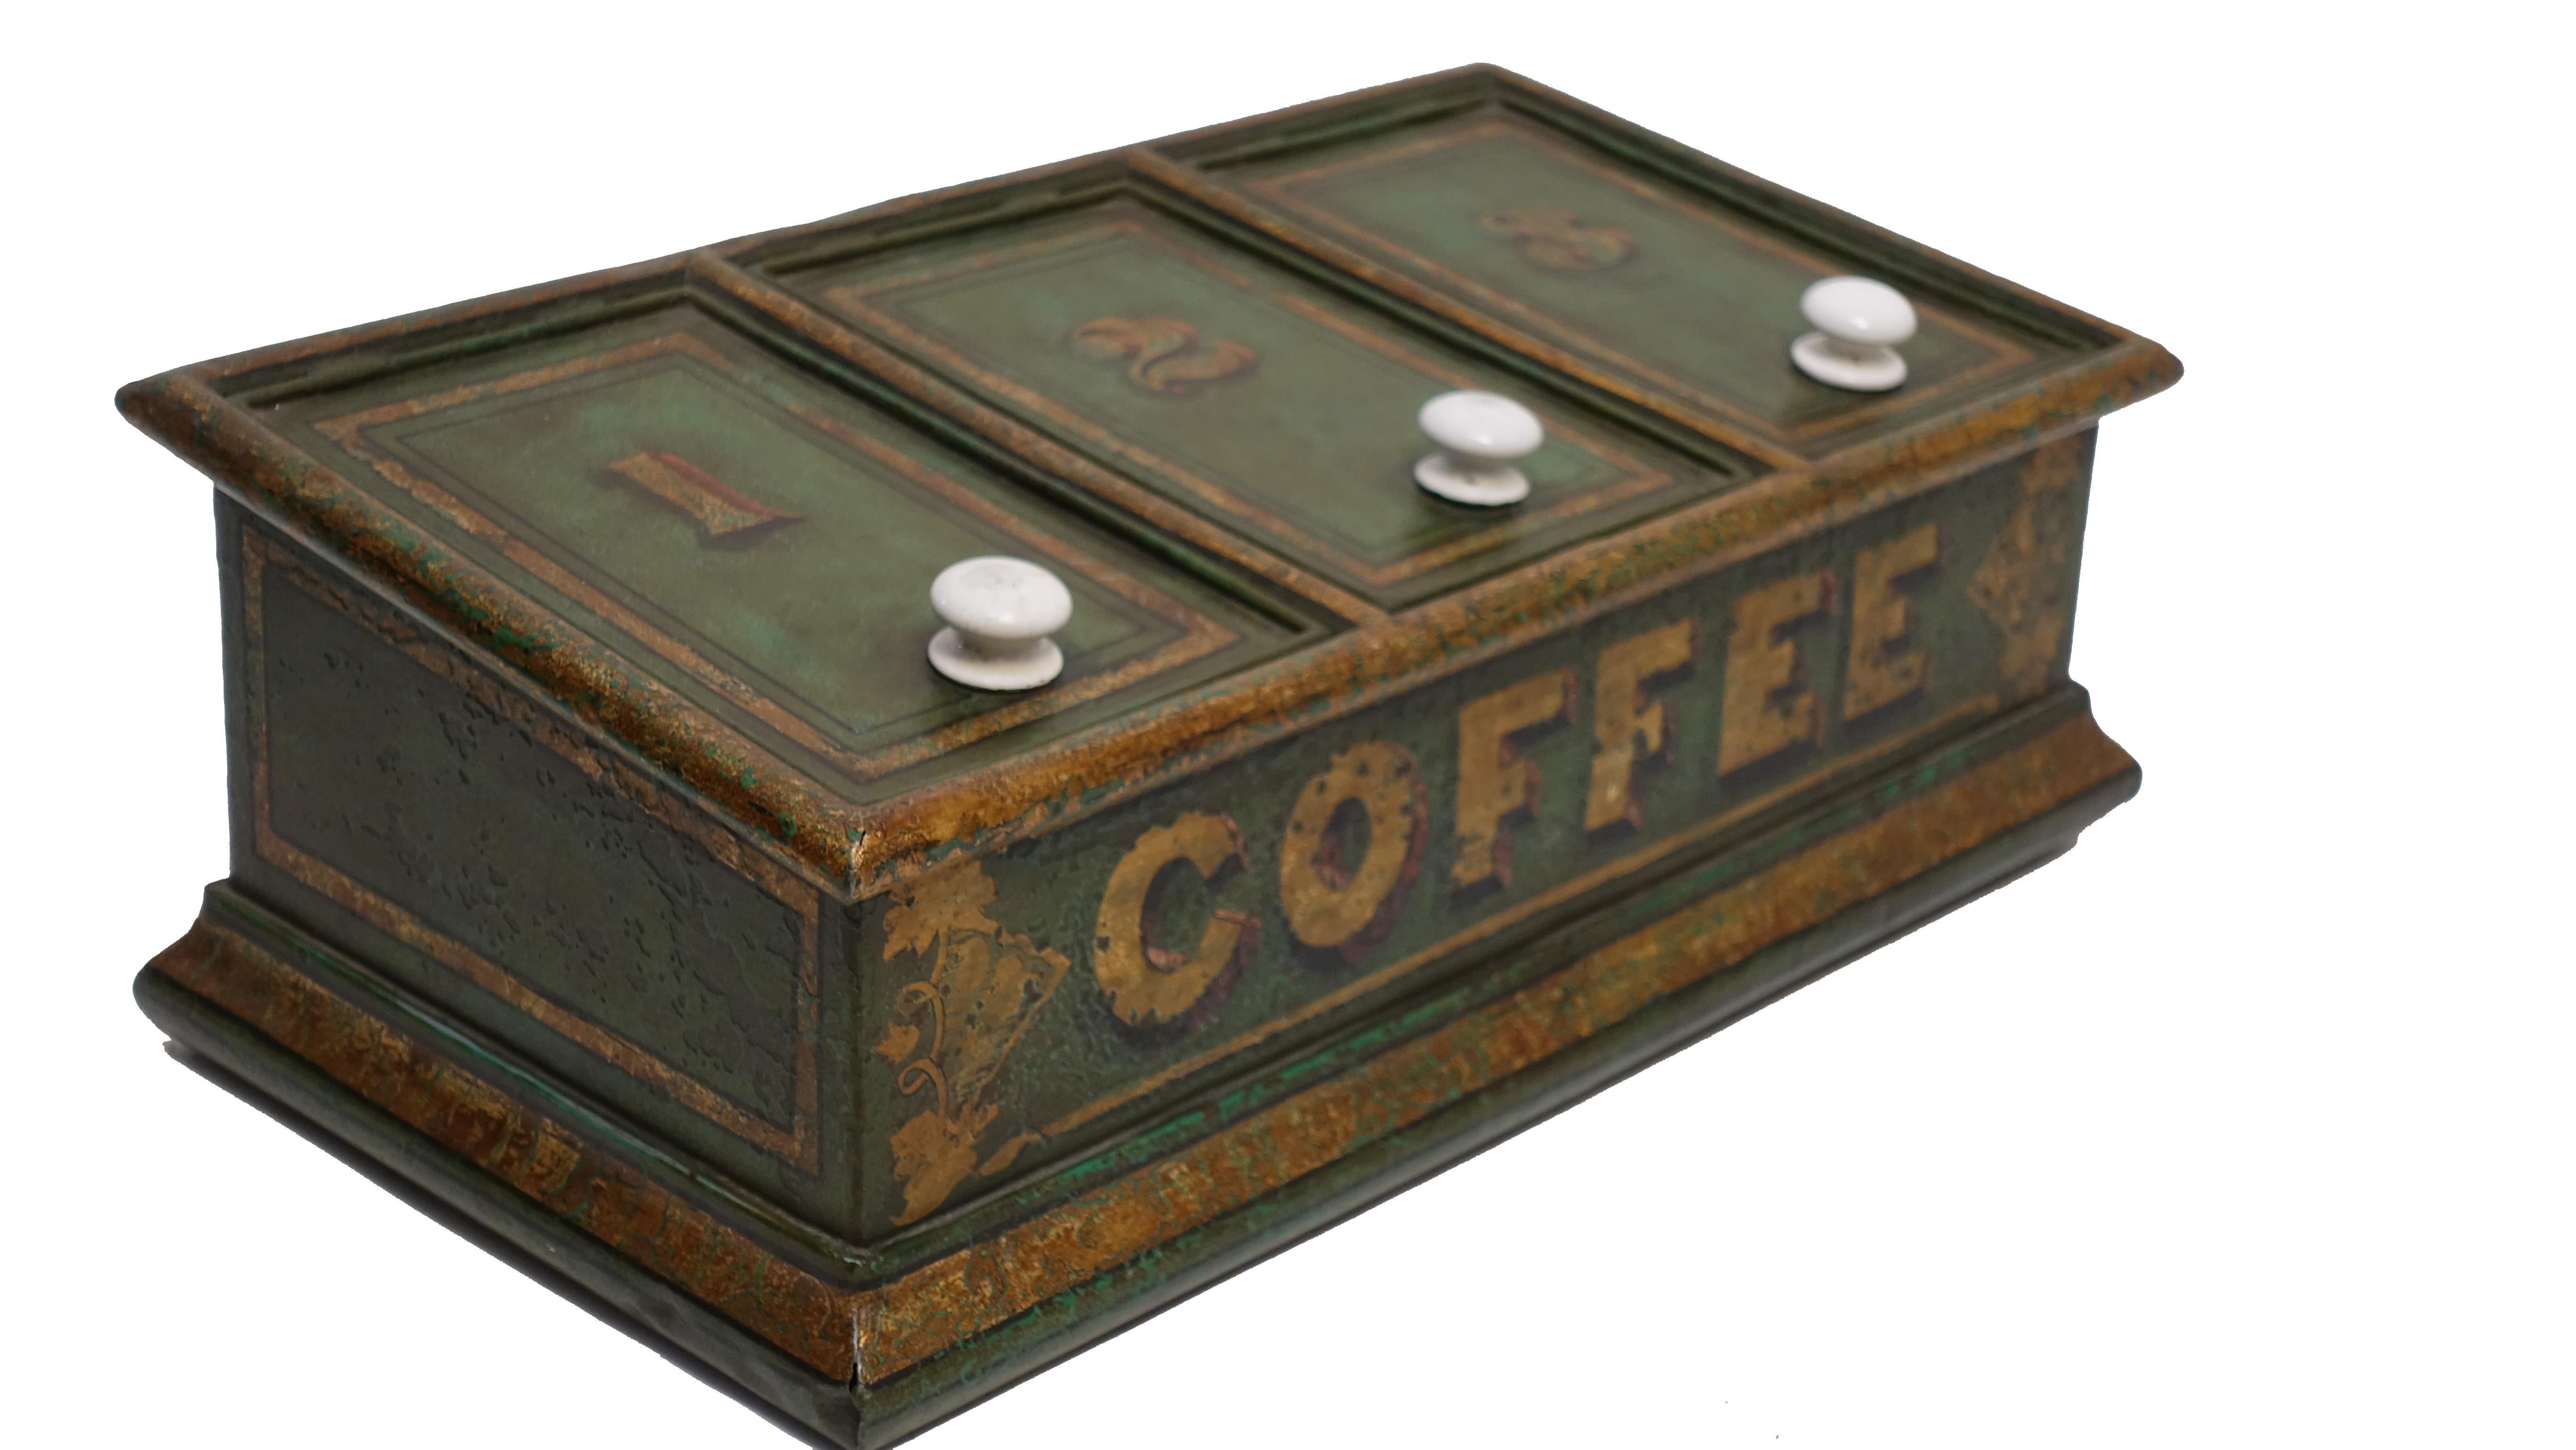 Tin Green Tole Painted Coffee Bin Store Display Dispenser, England, 19th Century